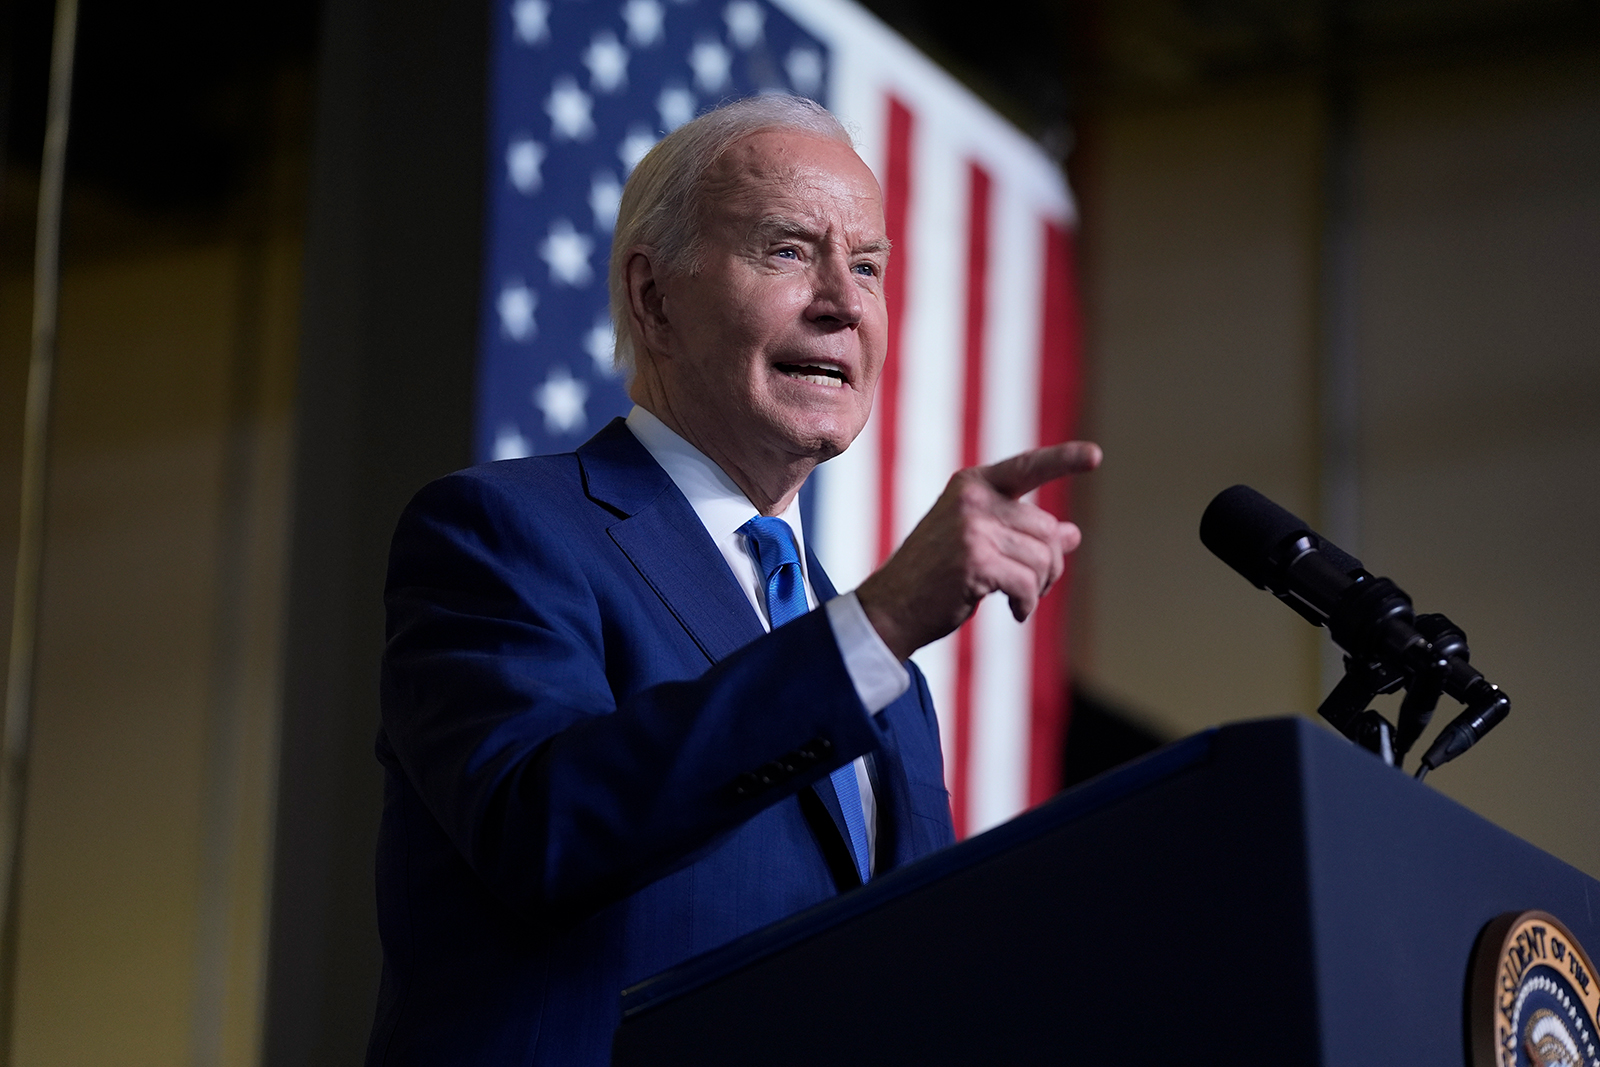 Joe Biden delivers remarks on May 8, in Sturtevant, Wis. on May 8. (AP Photo/Evan Vucci)